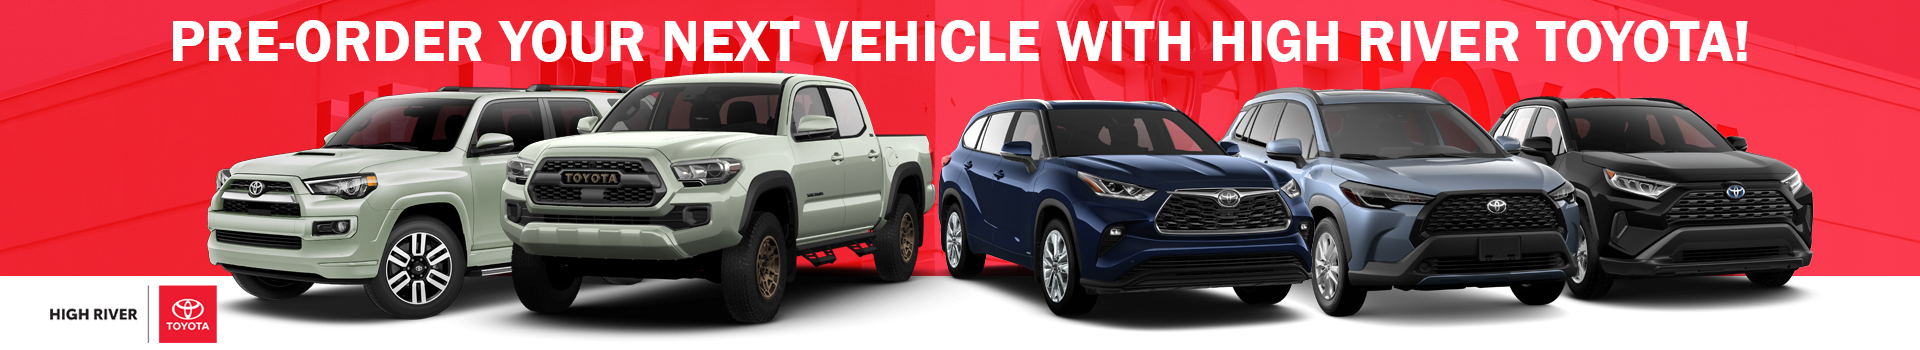 Pre-Order You Next Vehicle with High River Toyota